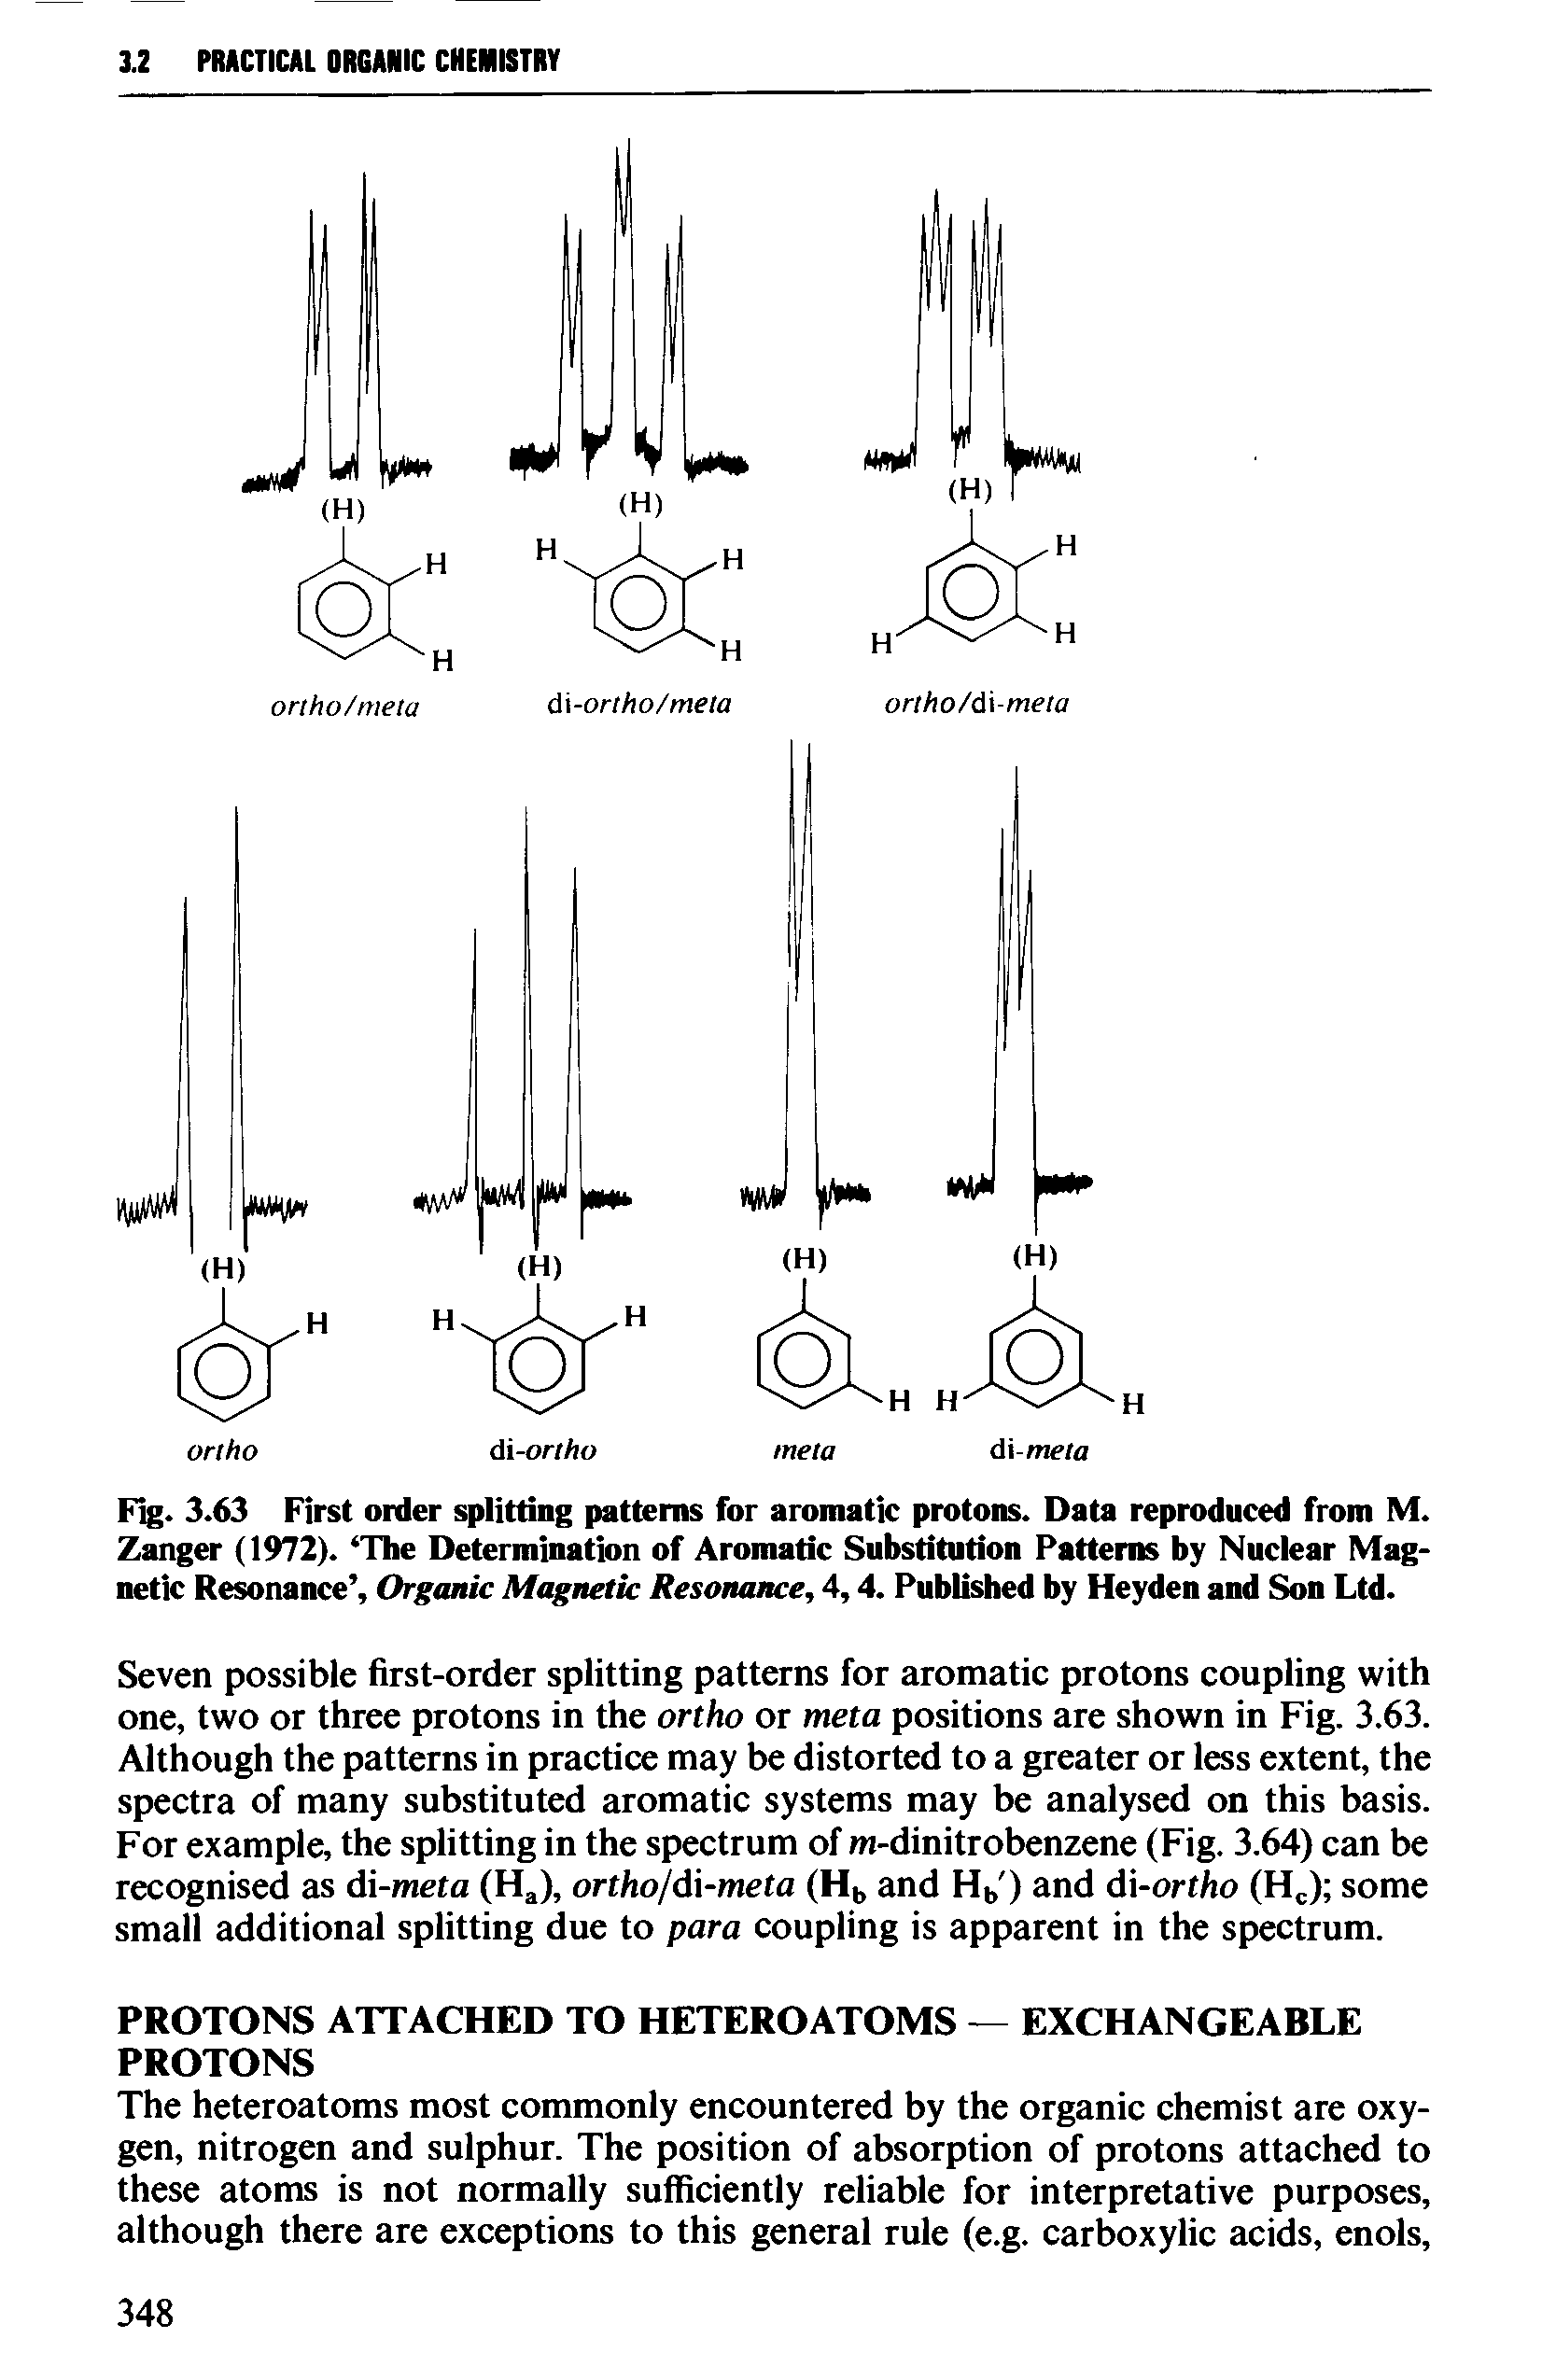 Fig. 3.63 First order splitting patterns for aromatic protons. Data reproduced from M. Zanger (1972). The Determination of Aromatic Substitution Patterns by Nuclear Magnetic Resonance , Organic Magnetic Resonance, 4,4. Published by Heyden and Son Ltd.